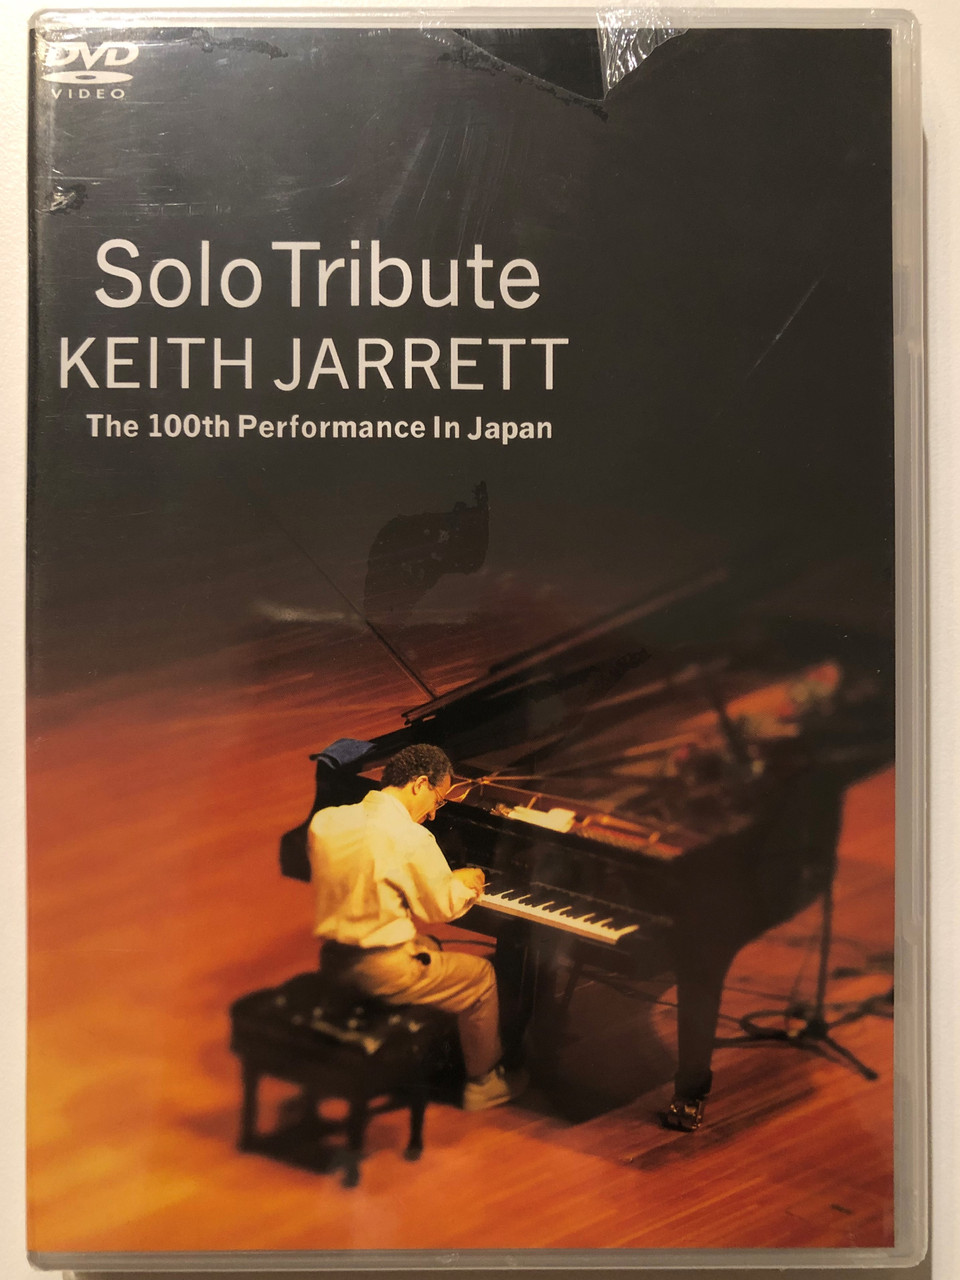 Keith_Jarrett_Solo_Tribute_Recorded_LIVE_at_SUNTORY_HALL_TOKYO_on_April_14_1987_Directed_by_KANAME_KAWACHI_Concert_Produced_by_KOINUMA_MUSIC_Recorded_by_TOSHIO_YAMANAKA___82449.1692016225.1280.1280.JPG (960×1280)